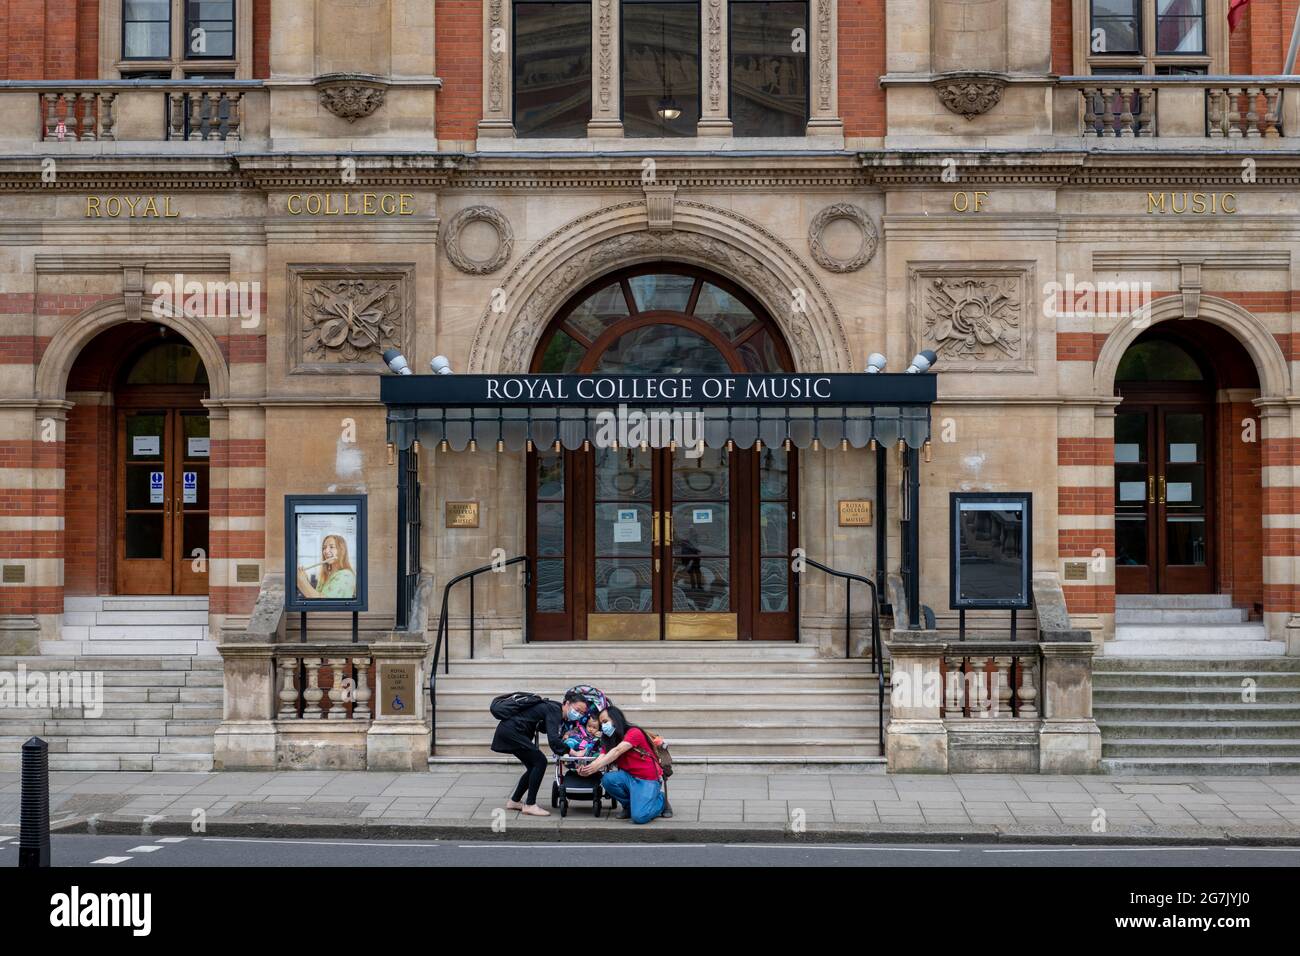 London. UK- 07.11. 2021. Exterior view of the entrance and facade of the Royal College of Music. Stock Photo